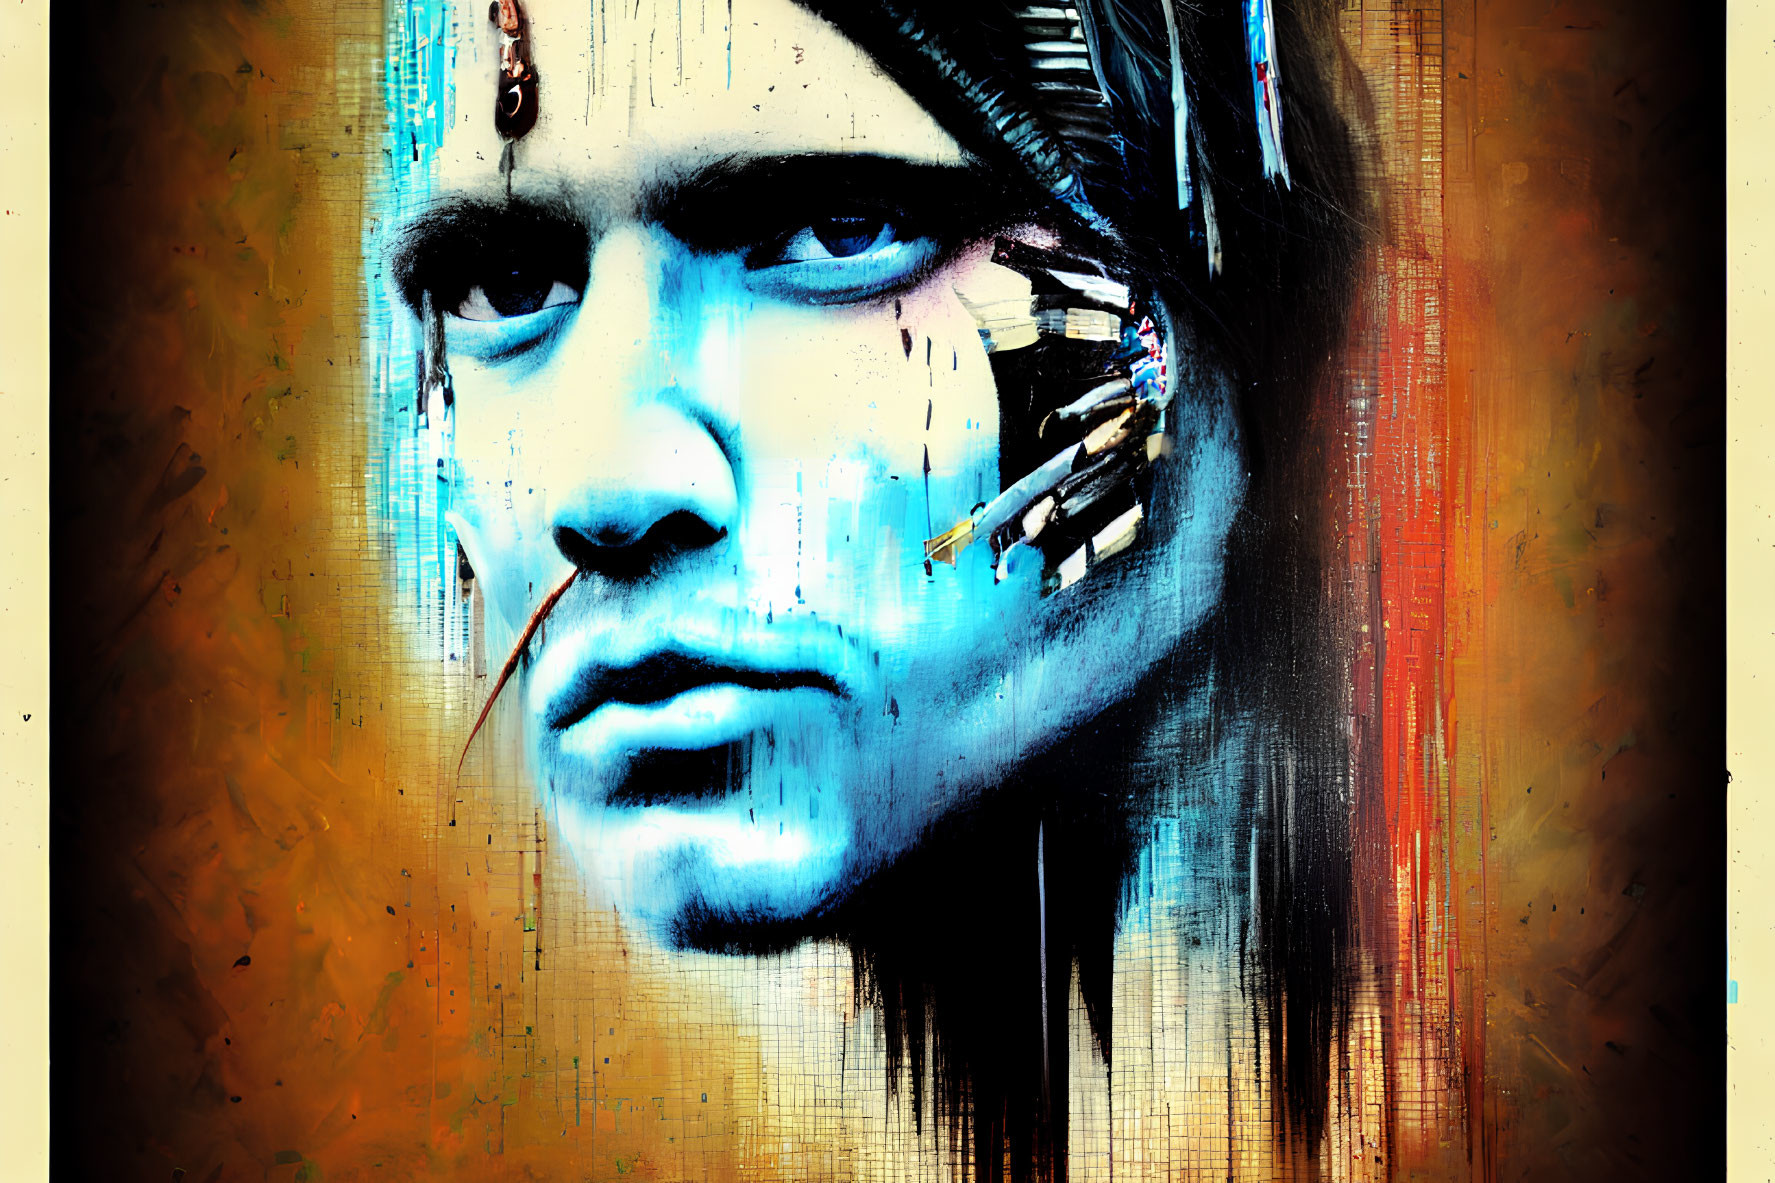 Abstract digital portrait with vibrant blue tones and textured background